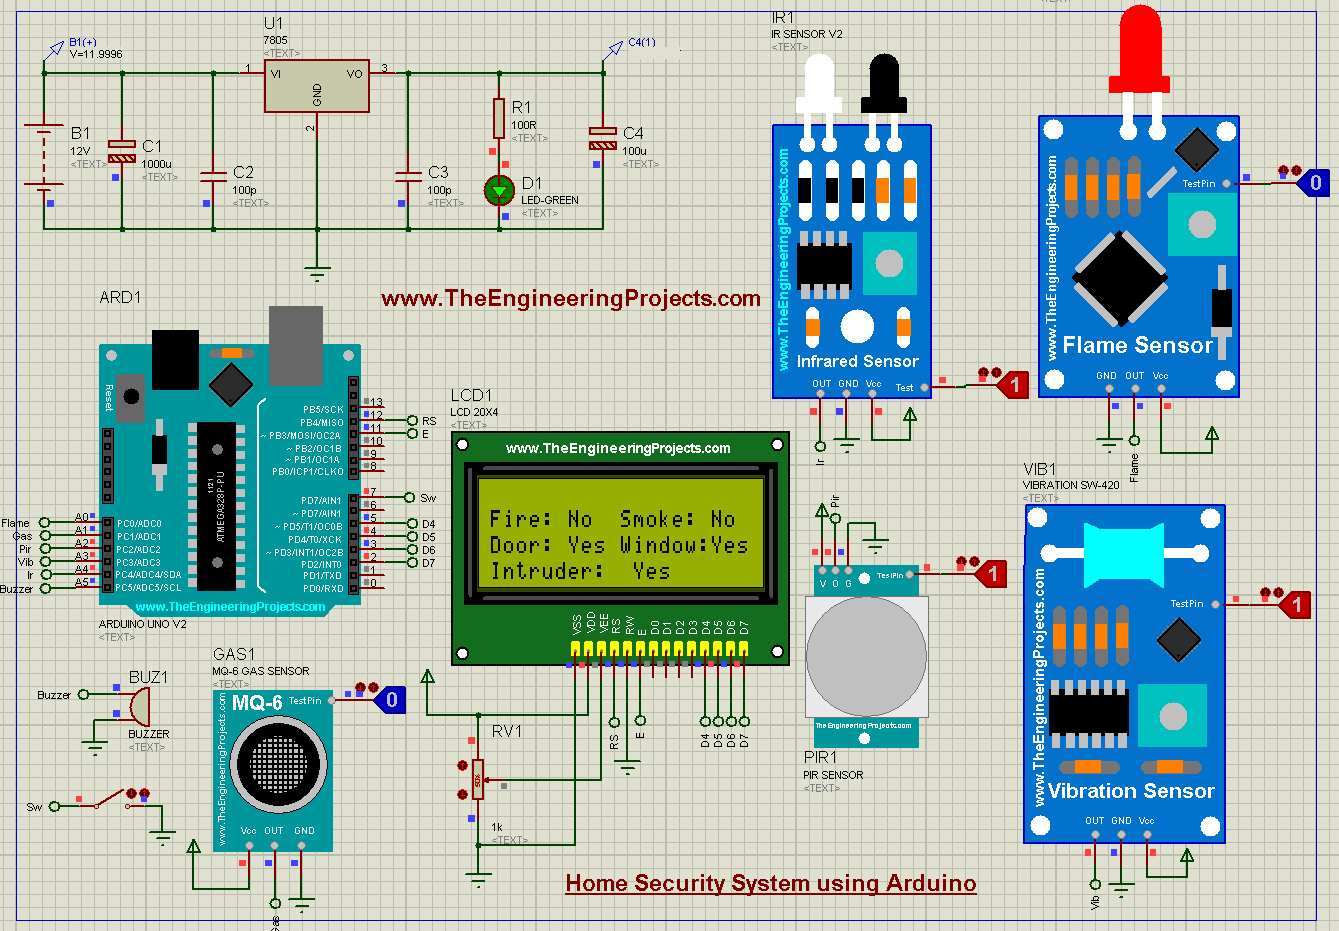 Home Security System using Arduino, Home Security System, Home Security System Arduino, arduino Home Security System, Home Security System simulation, Home Security System in proteus, Home Security Project, proteus simulation of home security project